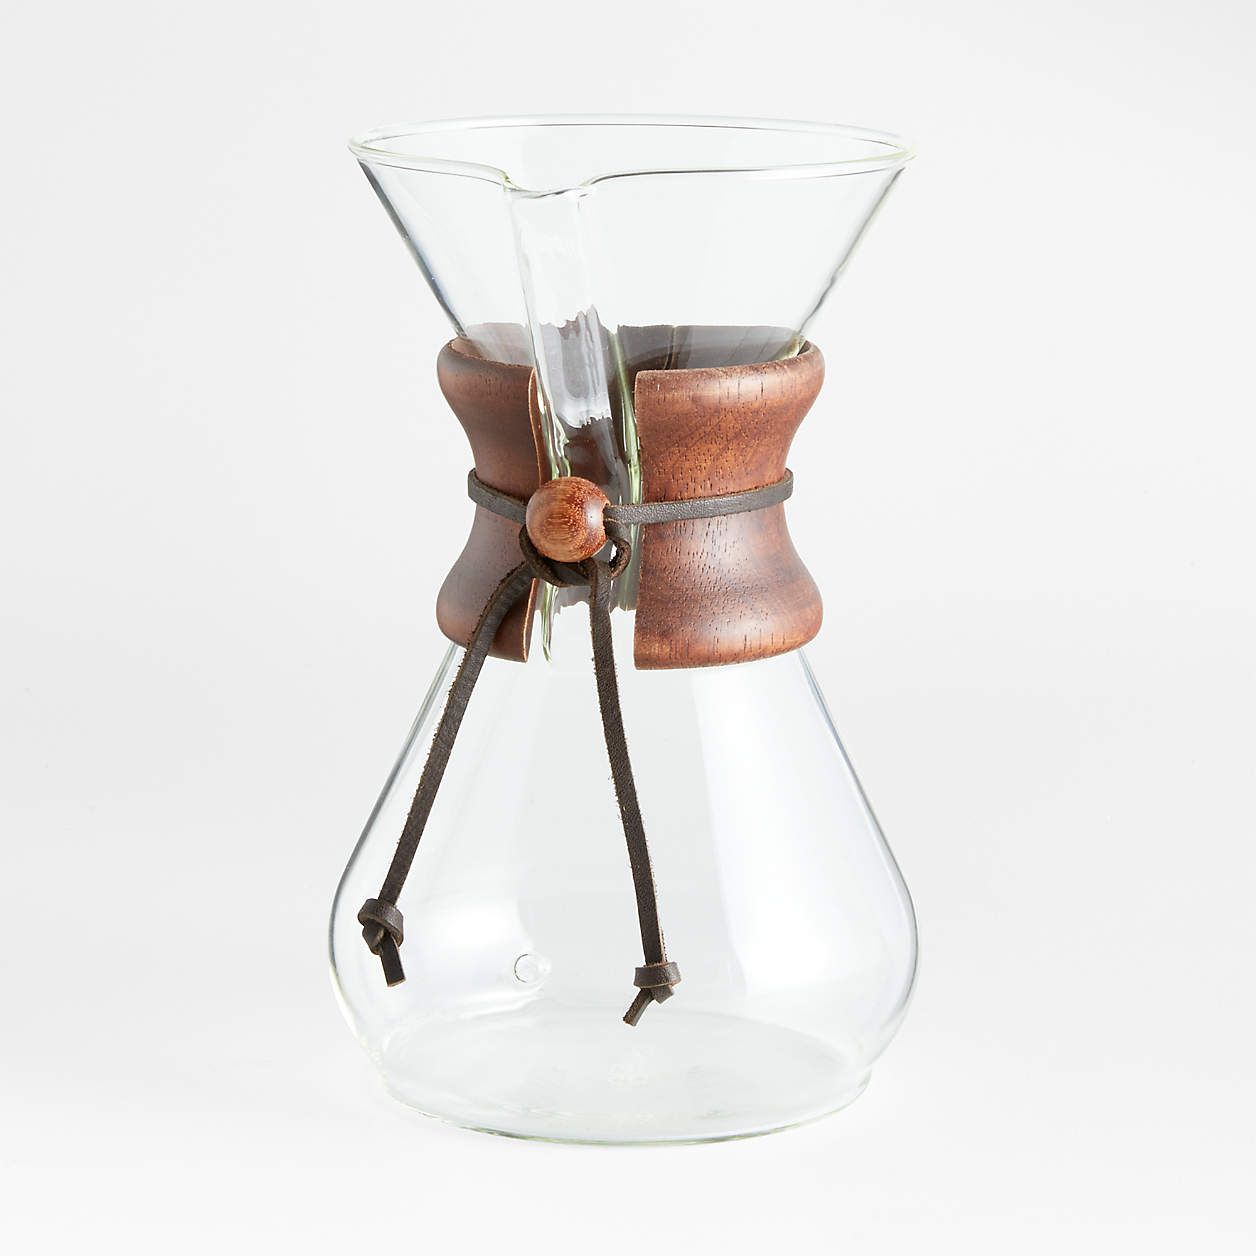 Chemex 8-Cup Glass Pour-Over Coffee Maker with Natural Wood Collar + Reviews | Crate & Barrel | Crate & Barrel